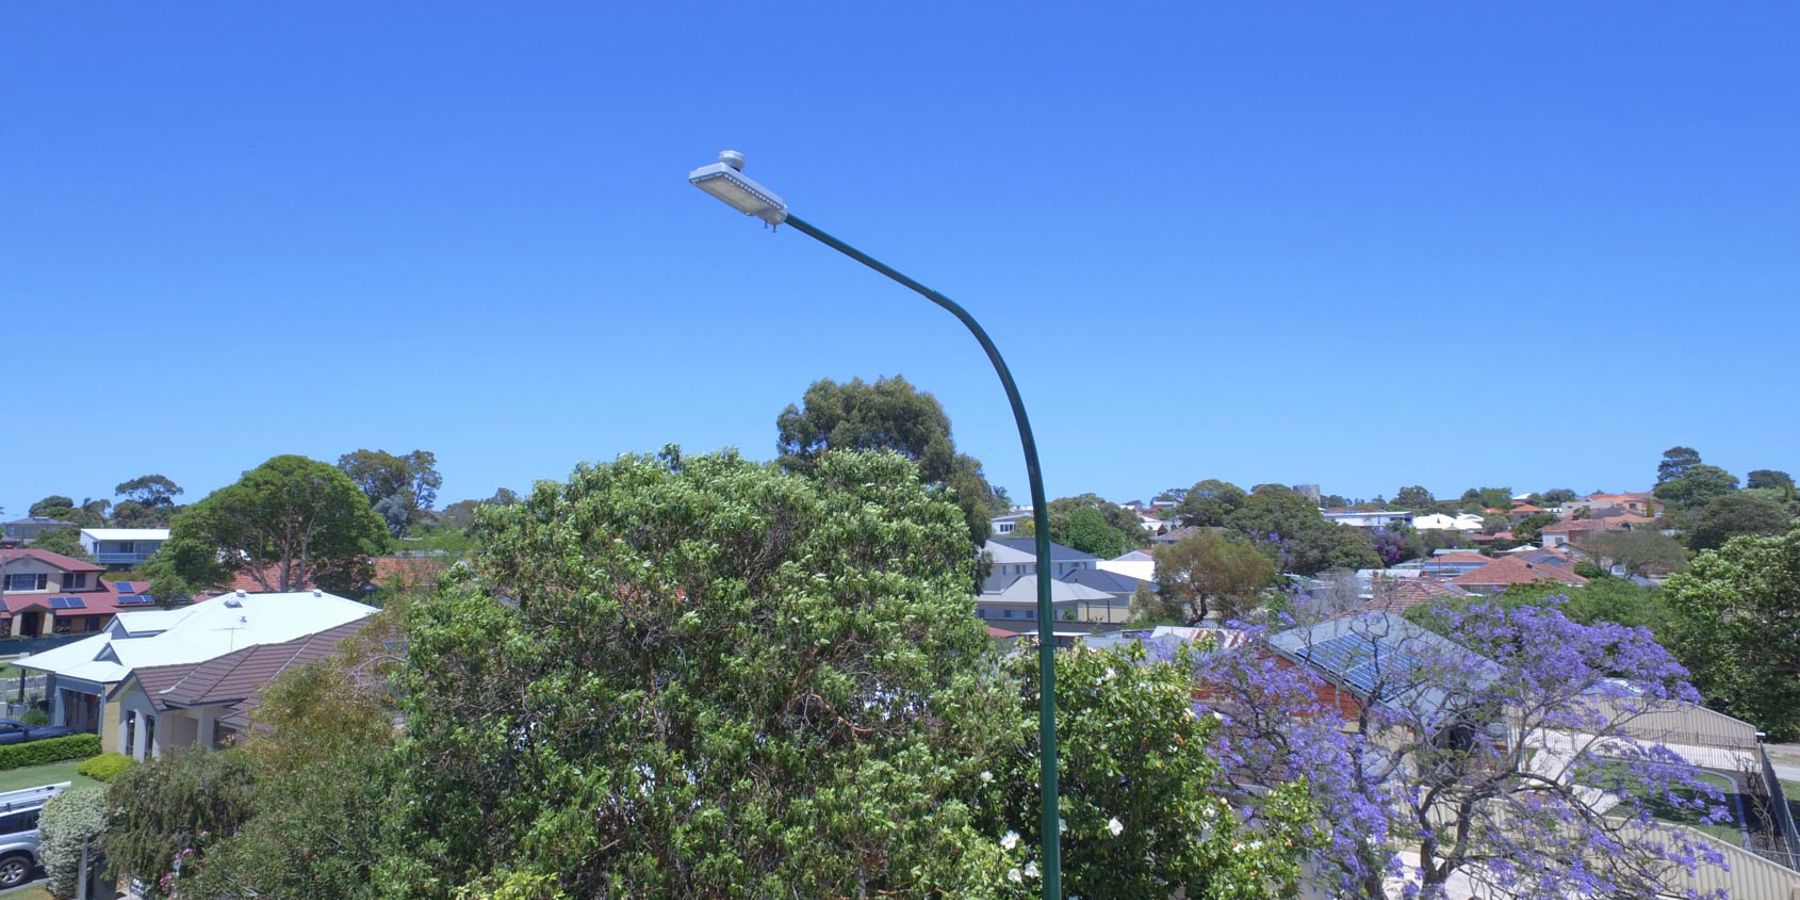 A streetlight in a residential suburb with trees in the background